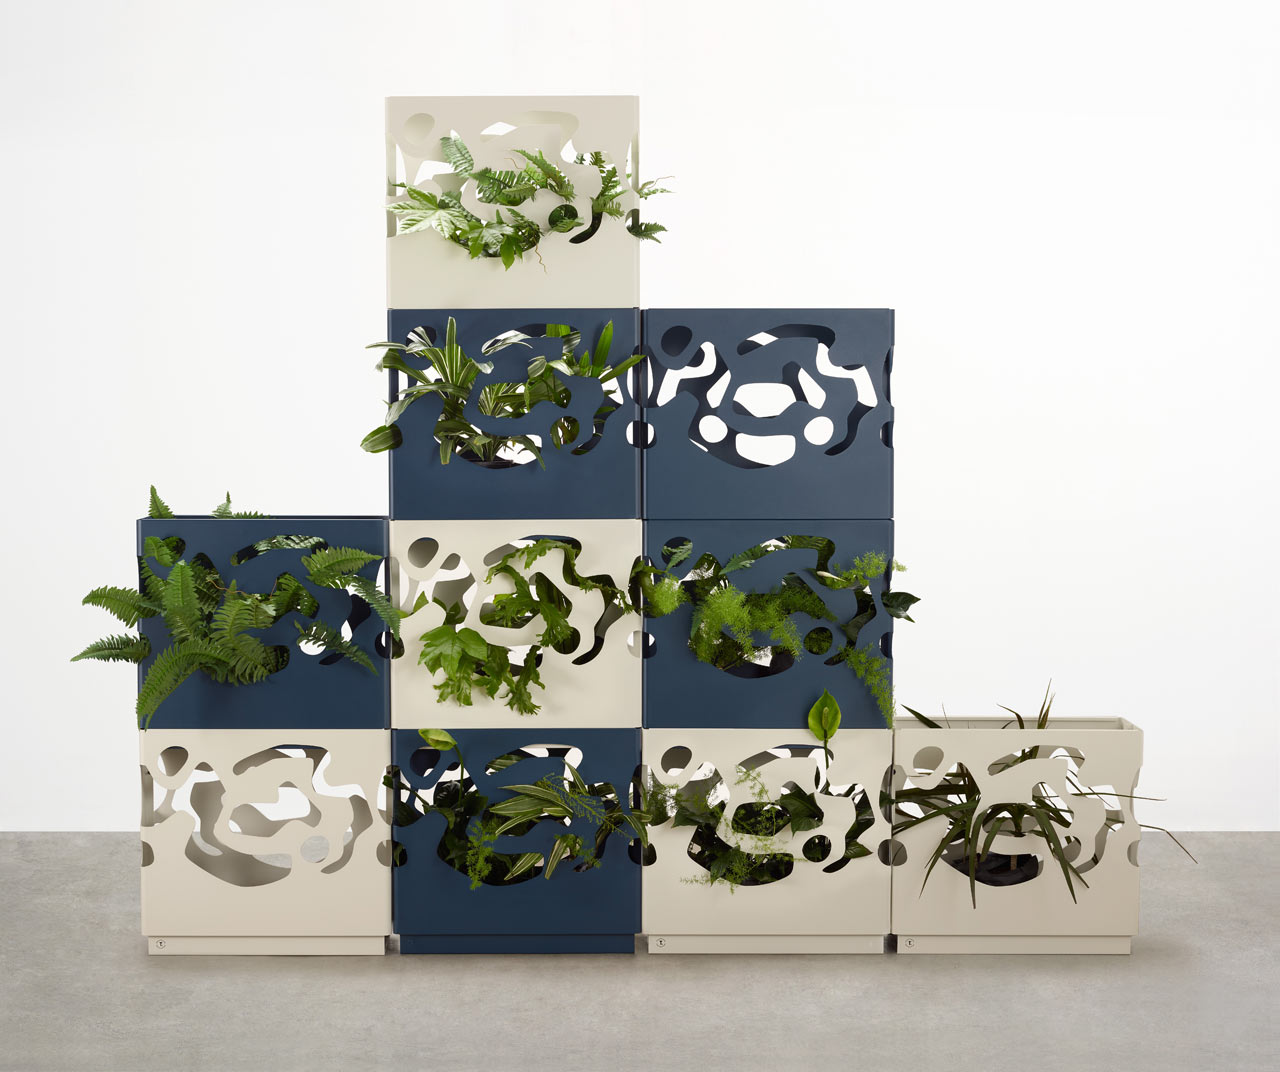 These stylish modern planters are inspired by topographical patterns of one famous architect